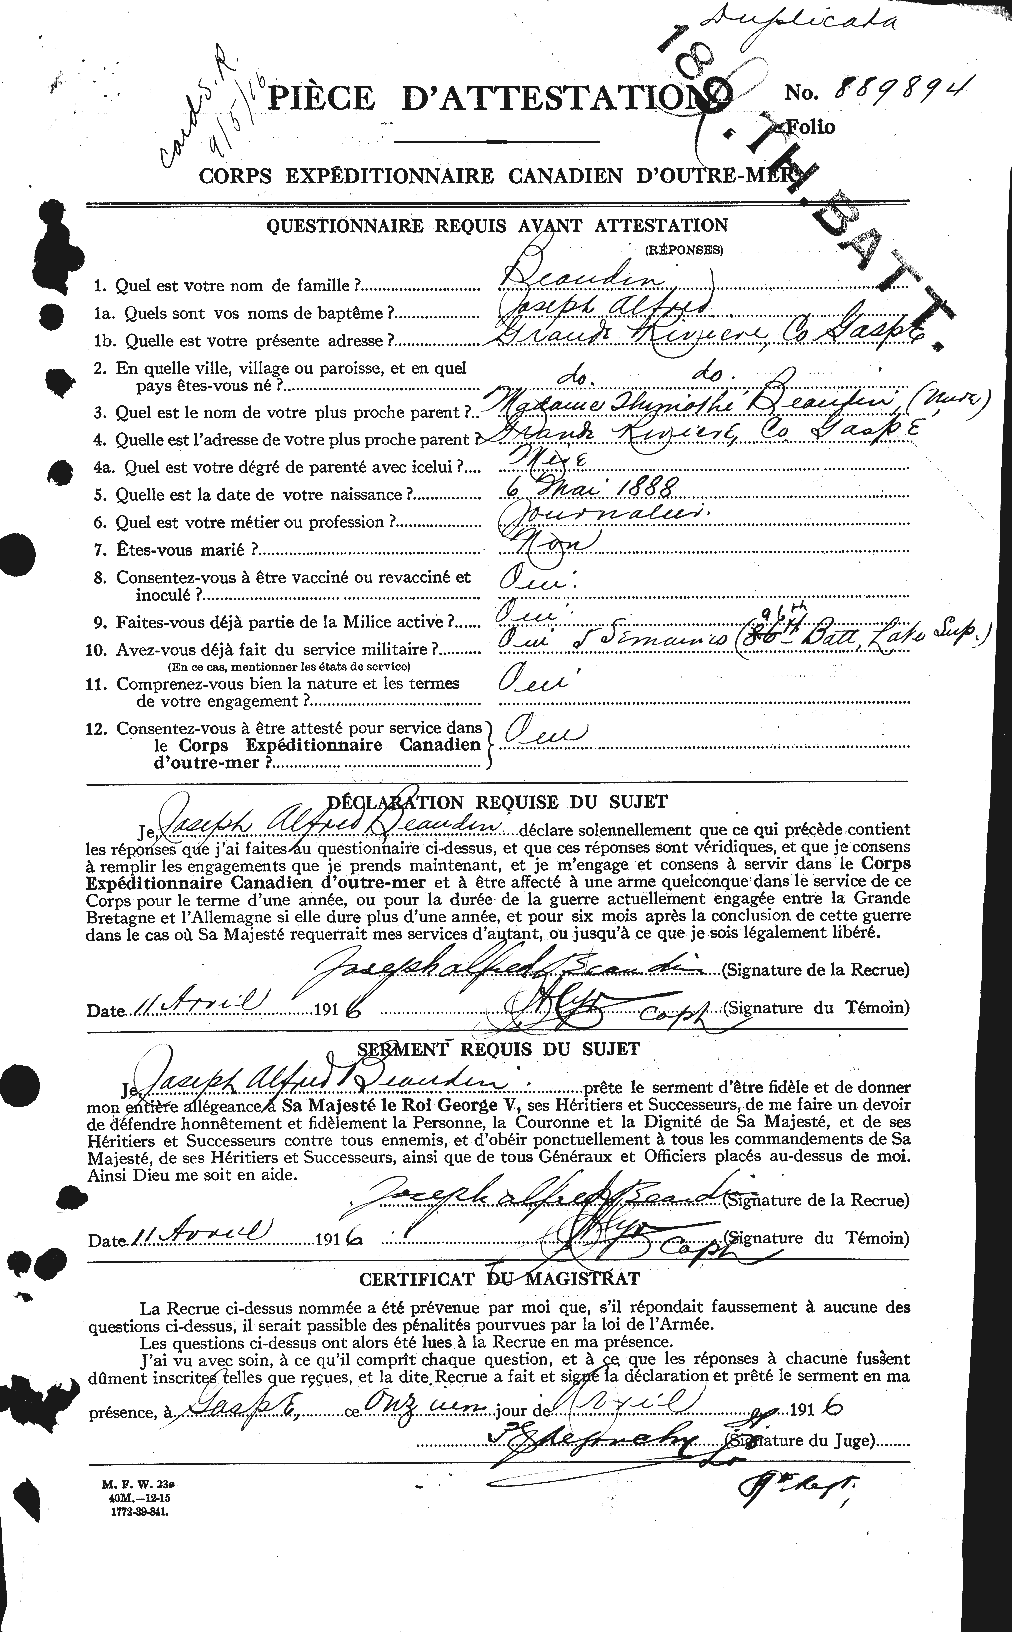 Personnel Records of the First World War - CEF 231178a